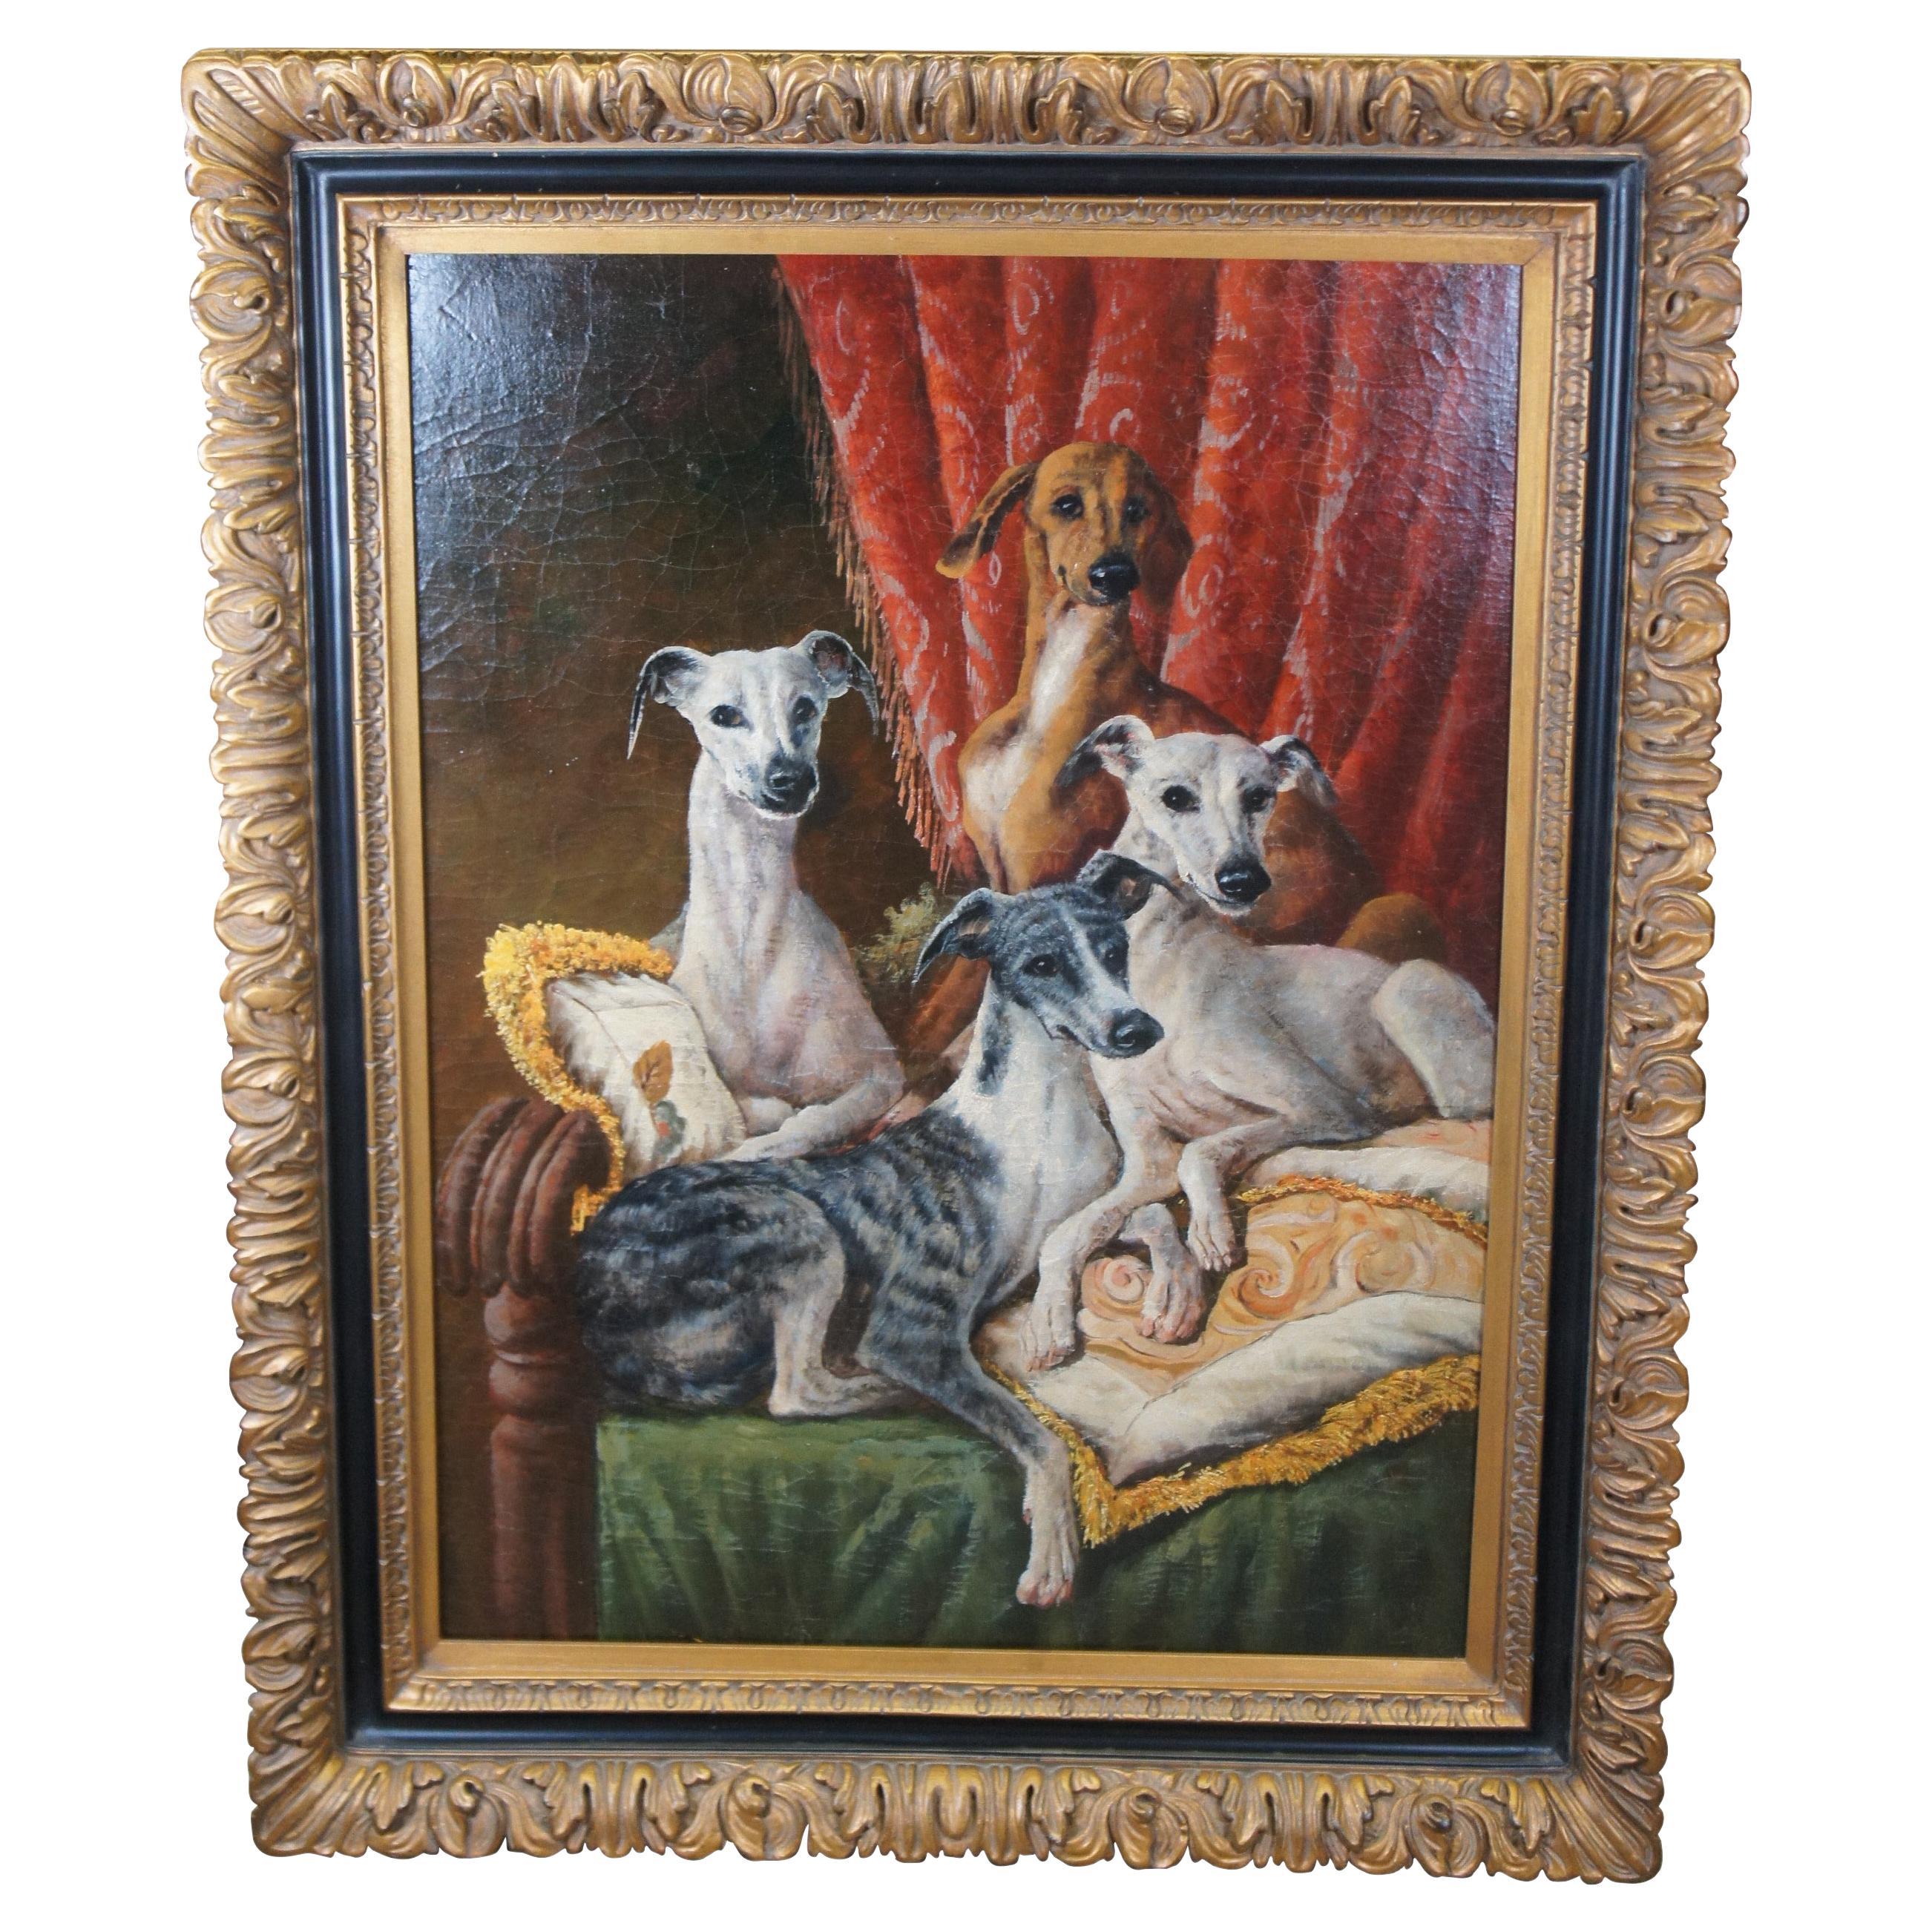 Large Vintage Whippet Dog Family Portrait Oil Painting on Board 57"